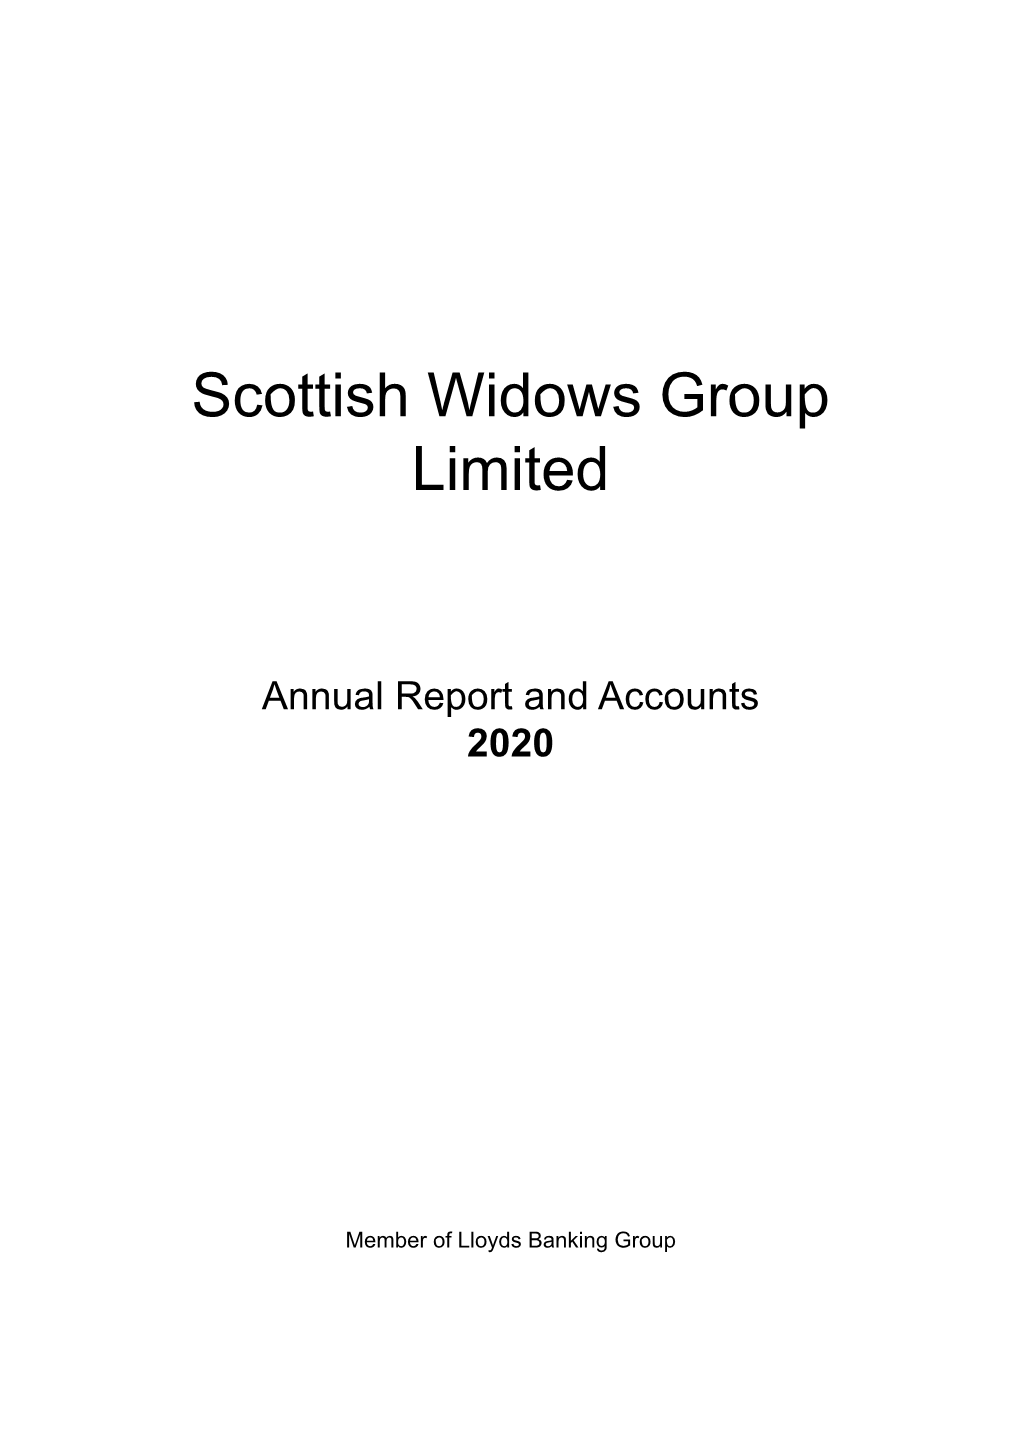 Scottish Widows Group Limited Annual Report